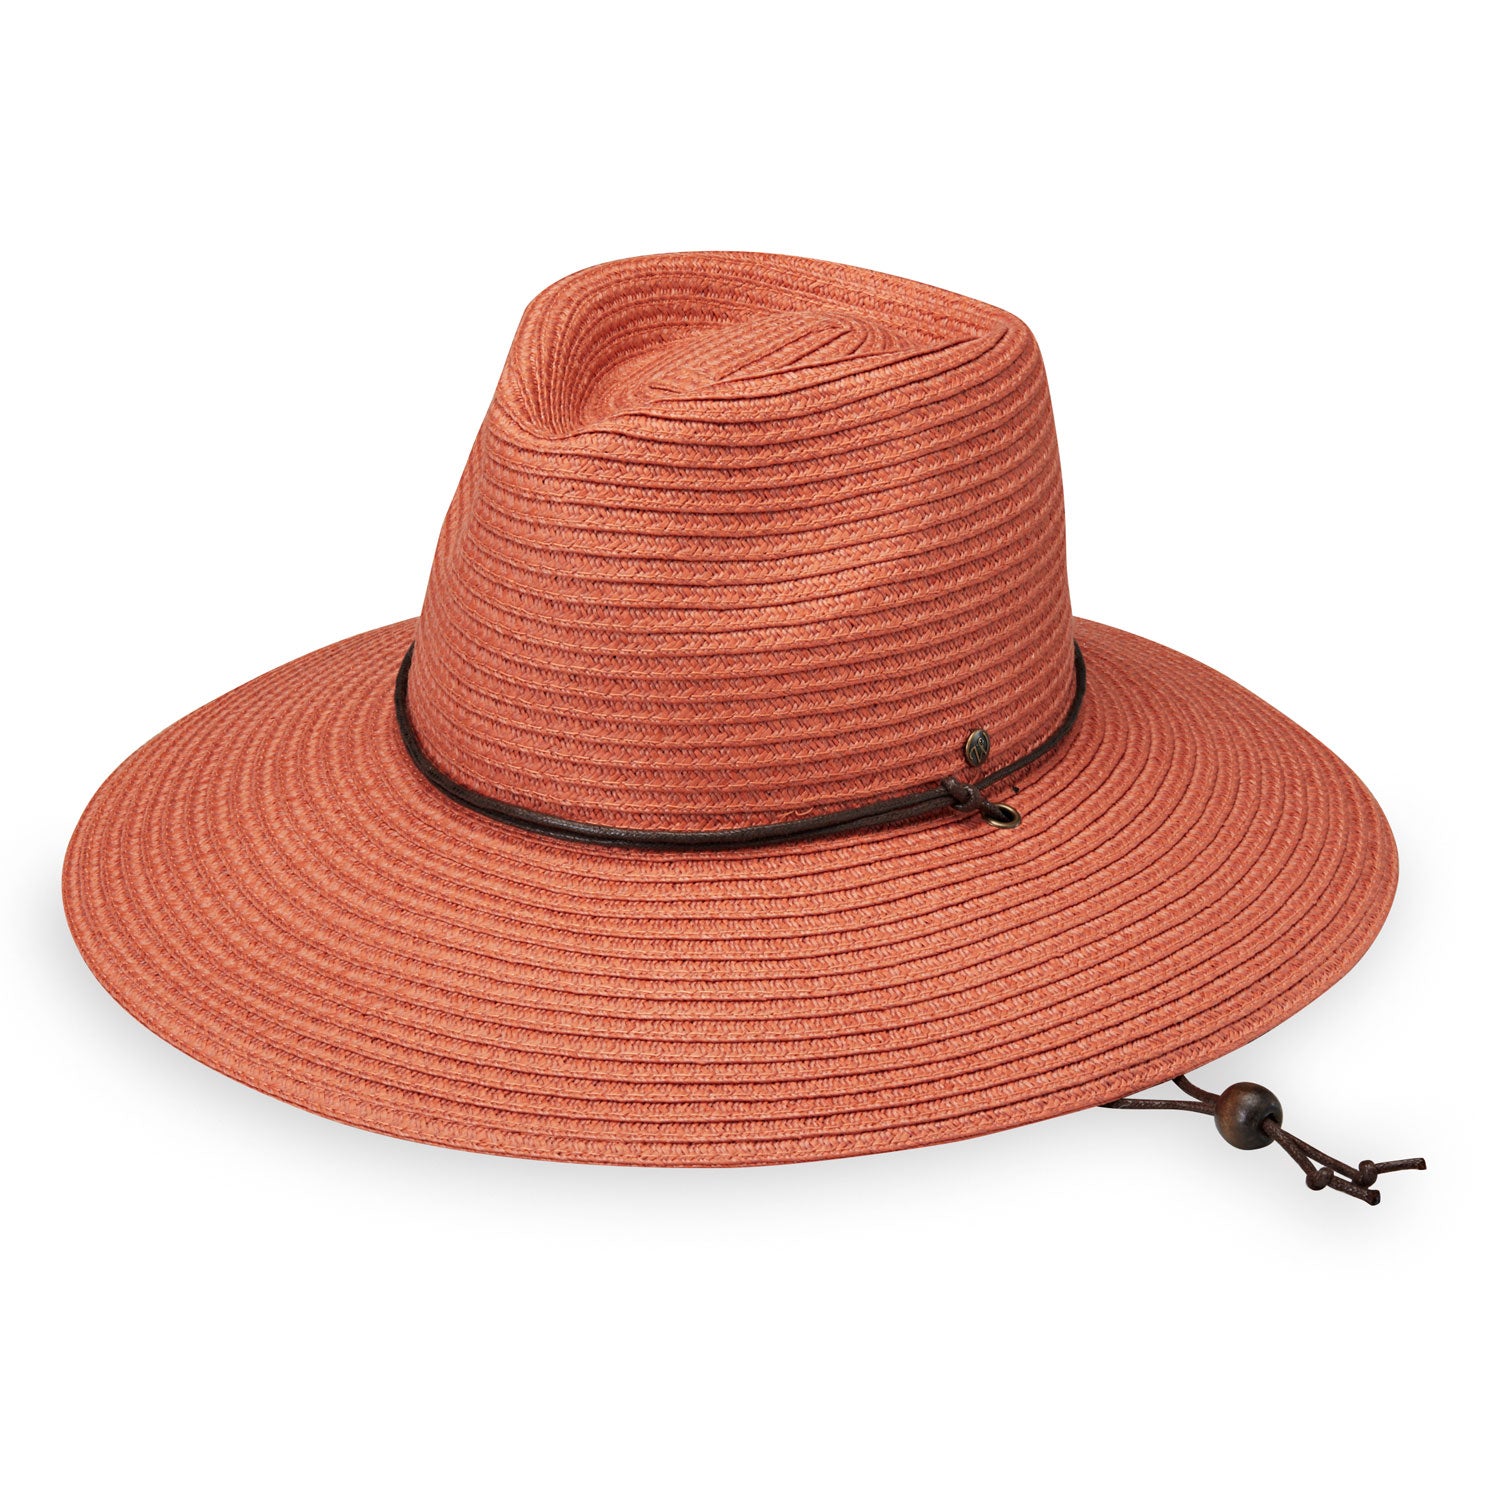 Featuring Women's Fedora Style Petite Sanibel Summer Sun Cap with Chinstrap from Wallaroo